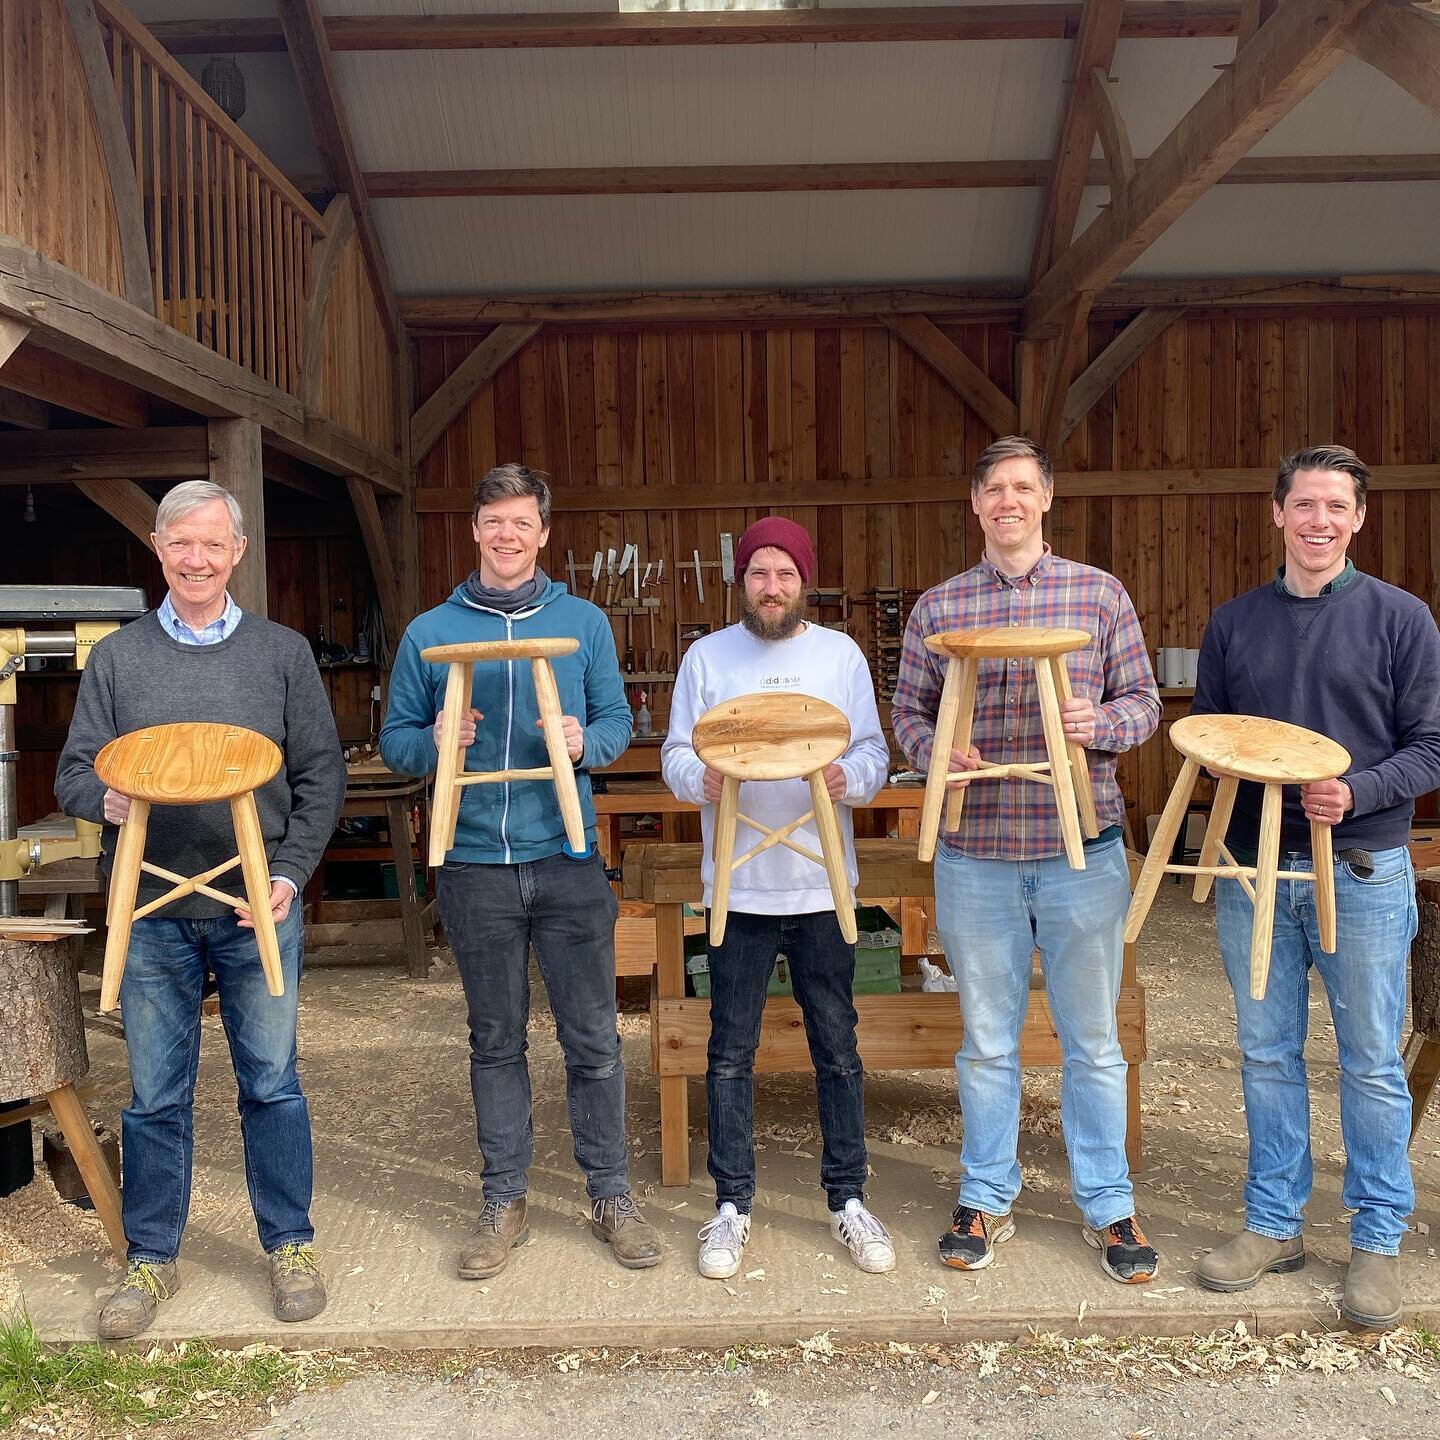 4 brothers and their dad made very fine stools on the last spring weekend course. It&rsquo;s was special to teach a family group for the first time. Such a wonderful shared experience for them all. The next courses will be in October, see website! No